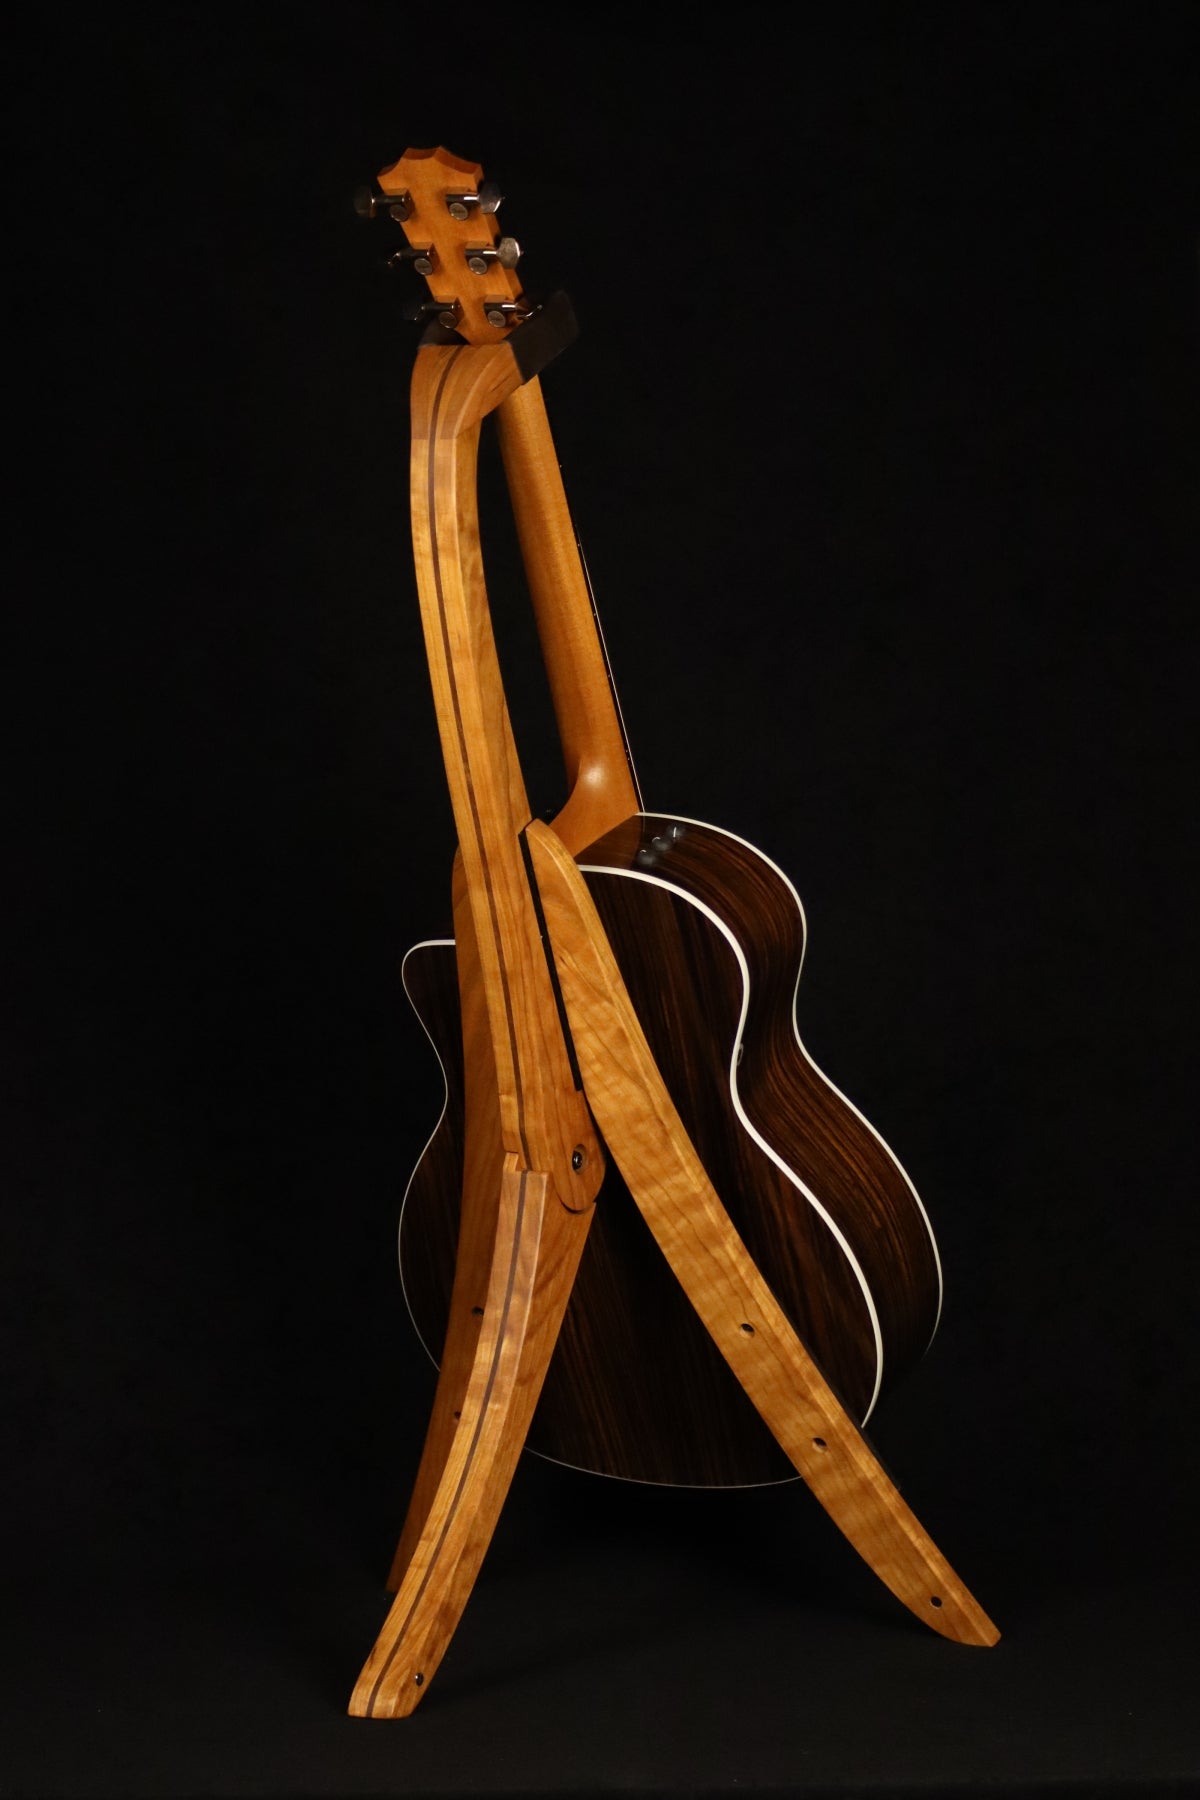 Acoustic guitar stand